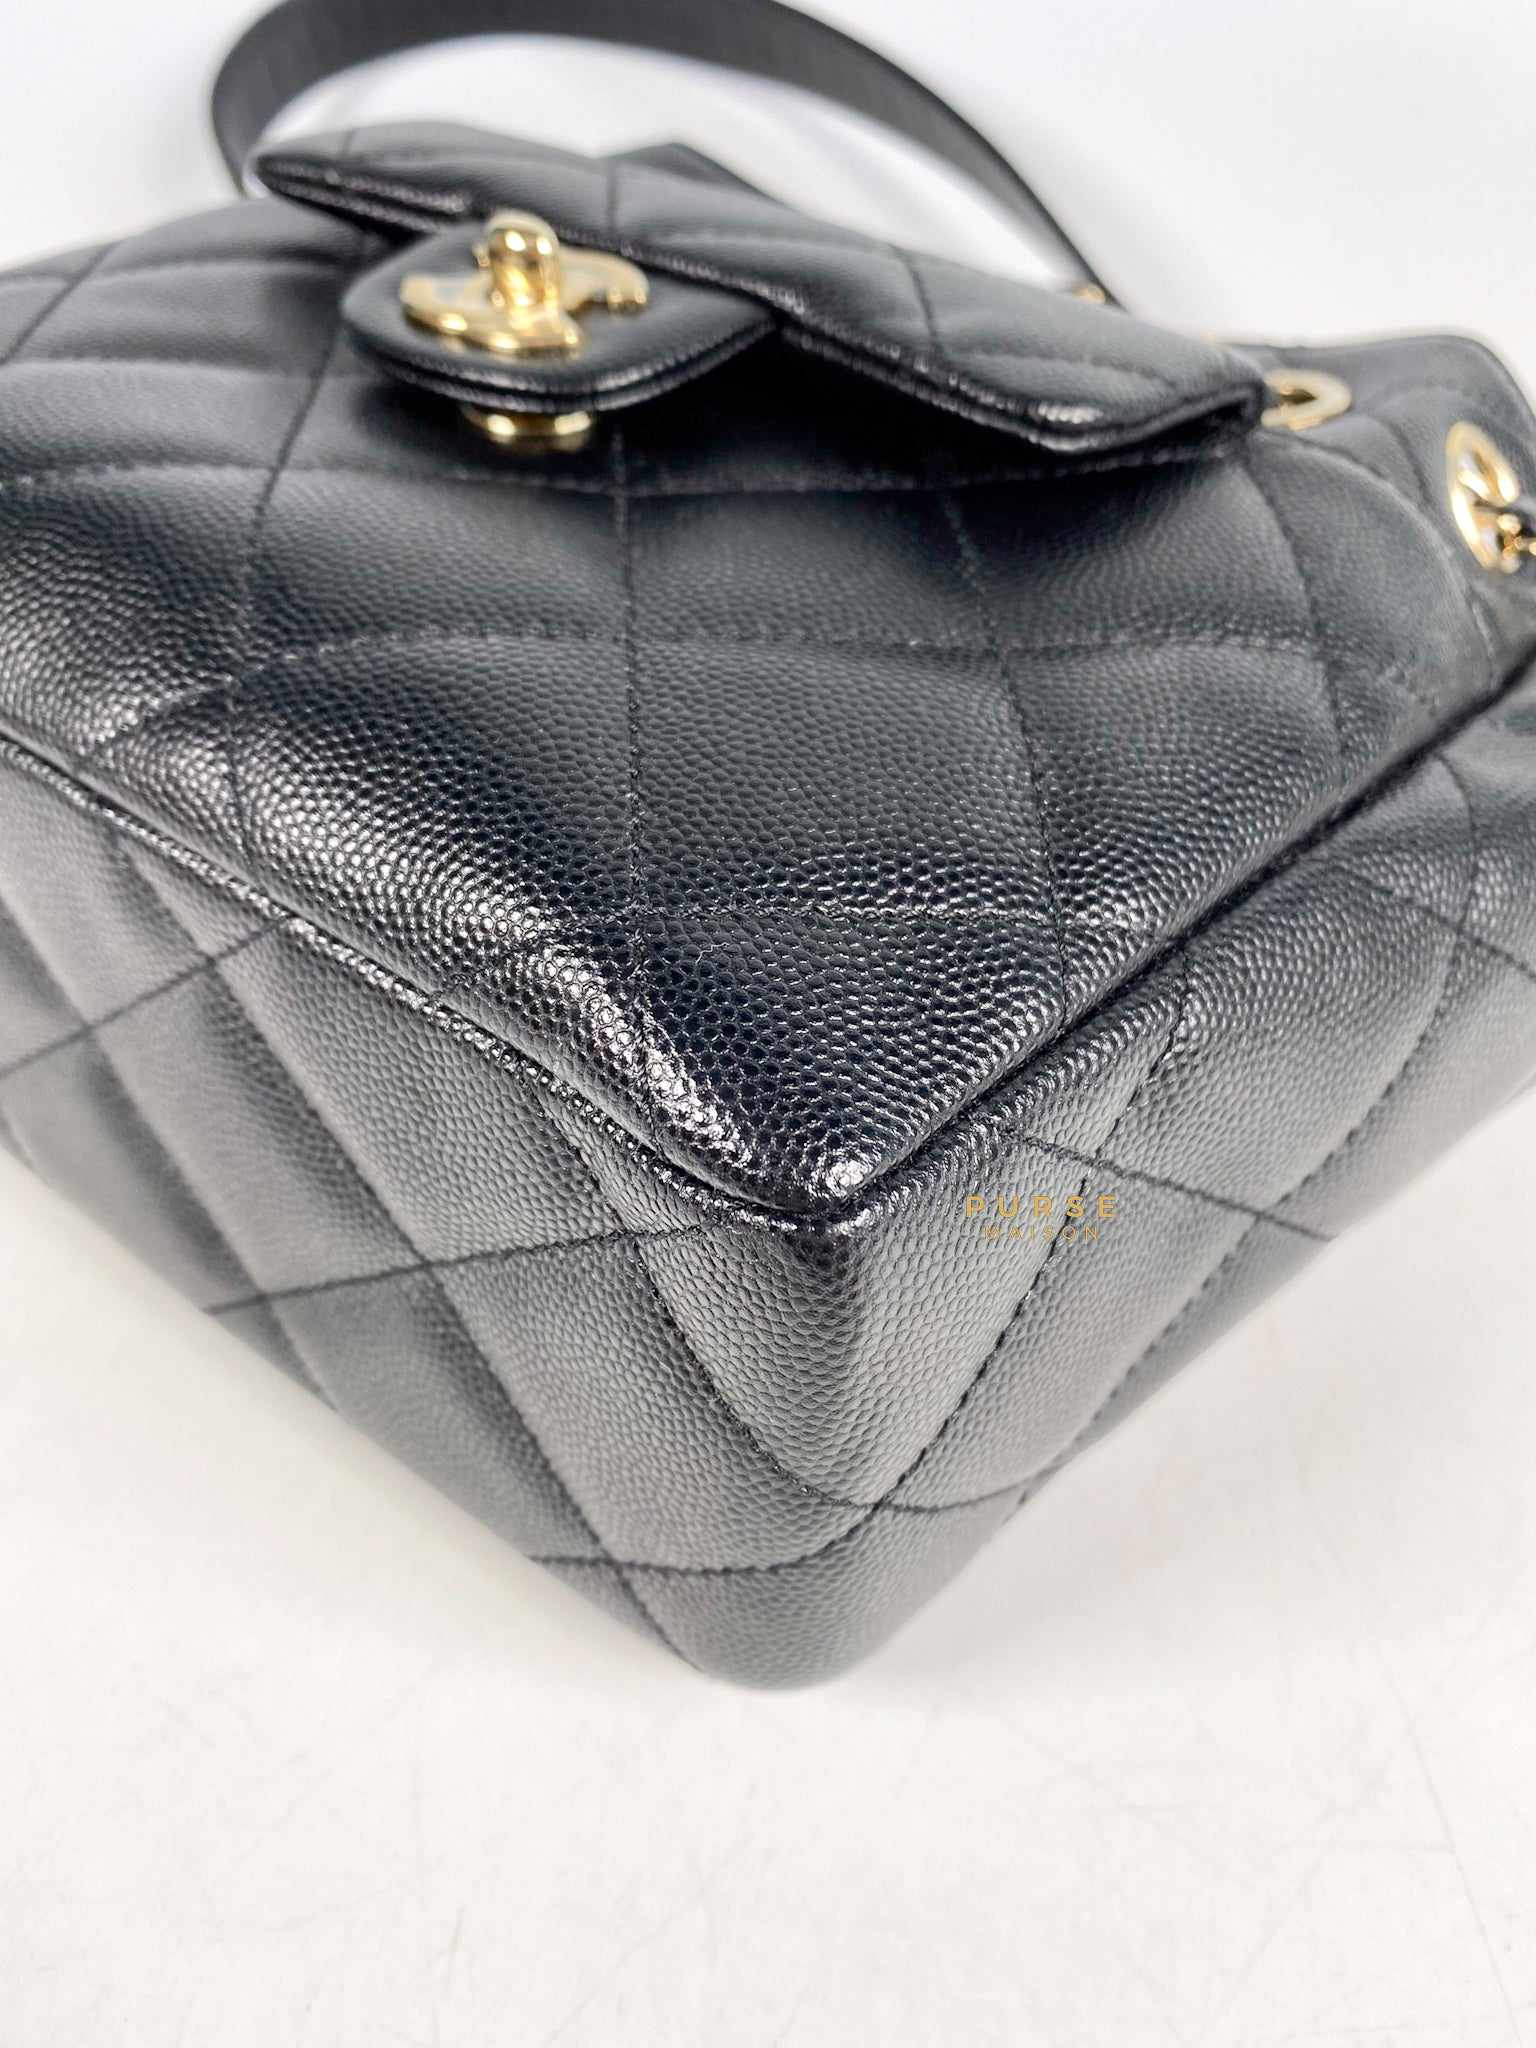 Chanel 2021 Seasonal Small Bucket Bag Black Quilted Caviar Leather Light Gold Hardware (microchip)